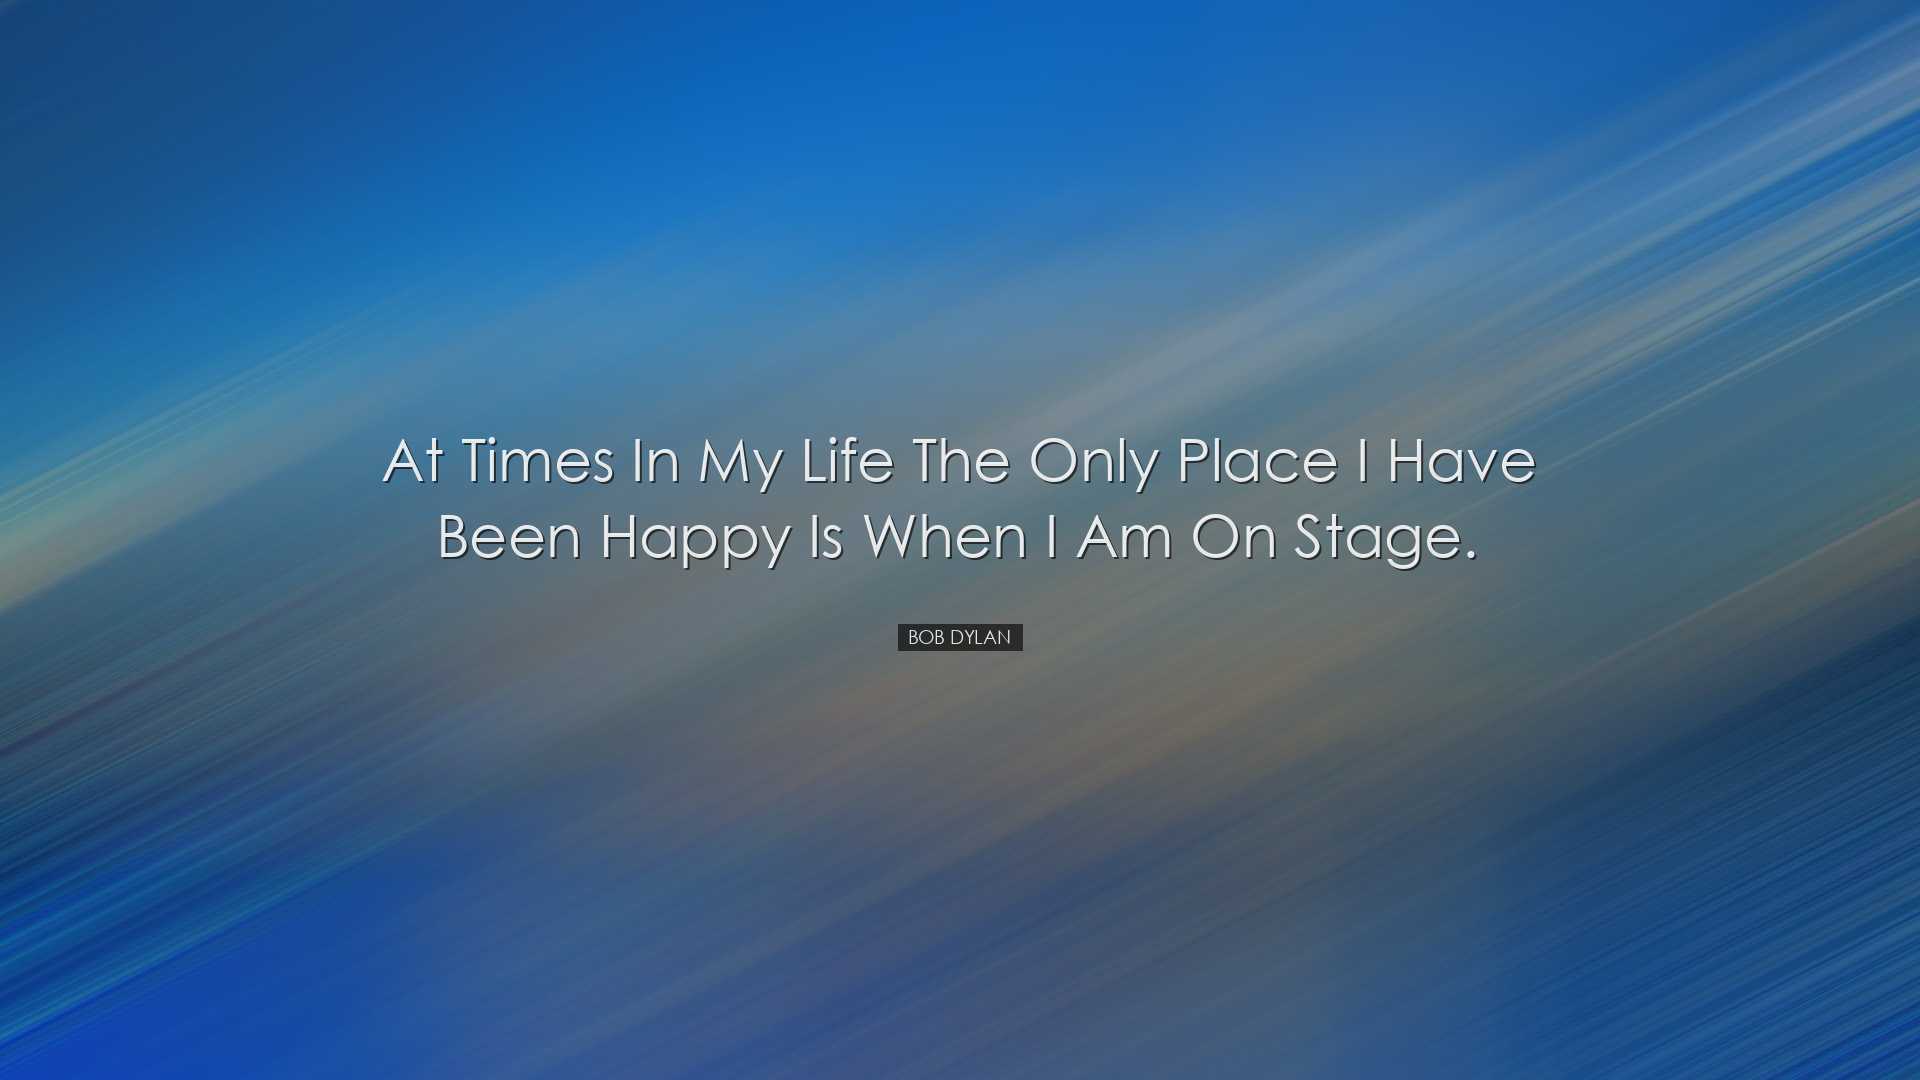 At times in my life the only place I have been happy is when I am